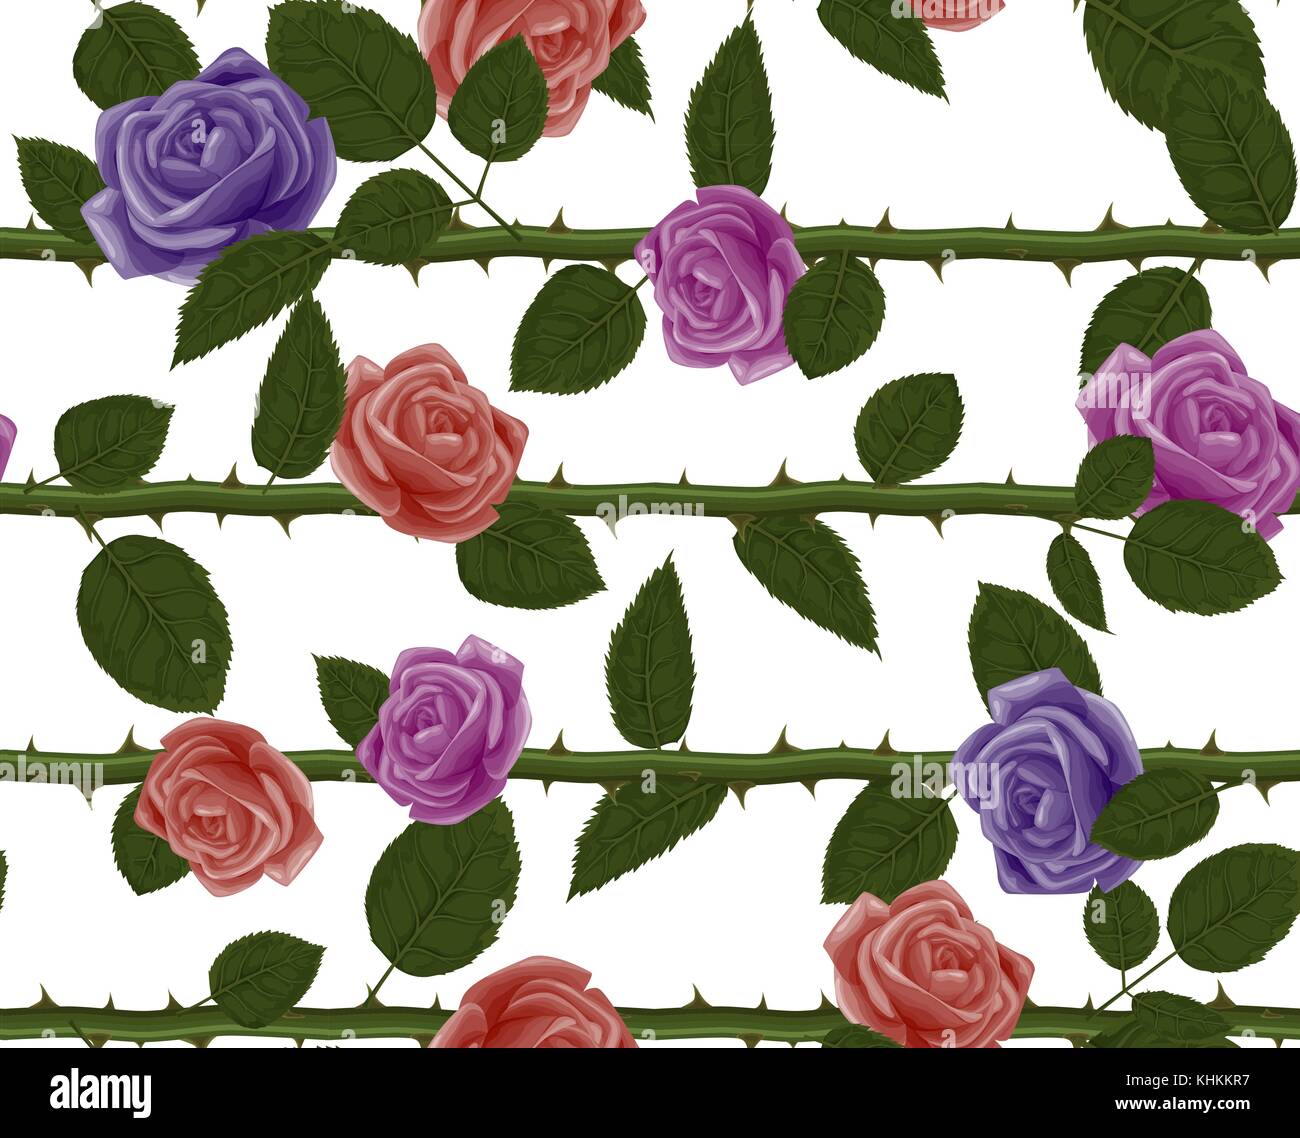 Seamless pattern with Vector watercolor style purple, pink, red Rose flower, green greenery leaves foliage on stem with thorns Hand drawn leaf texture Stock Vector